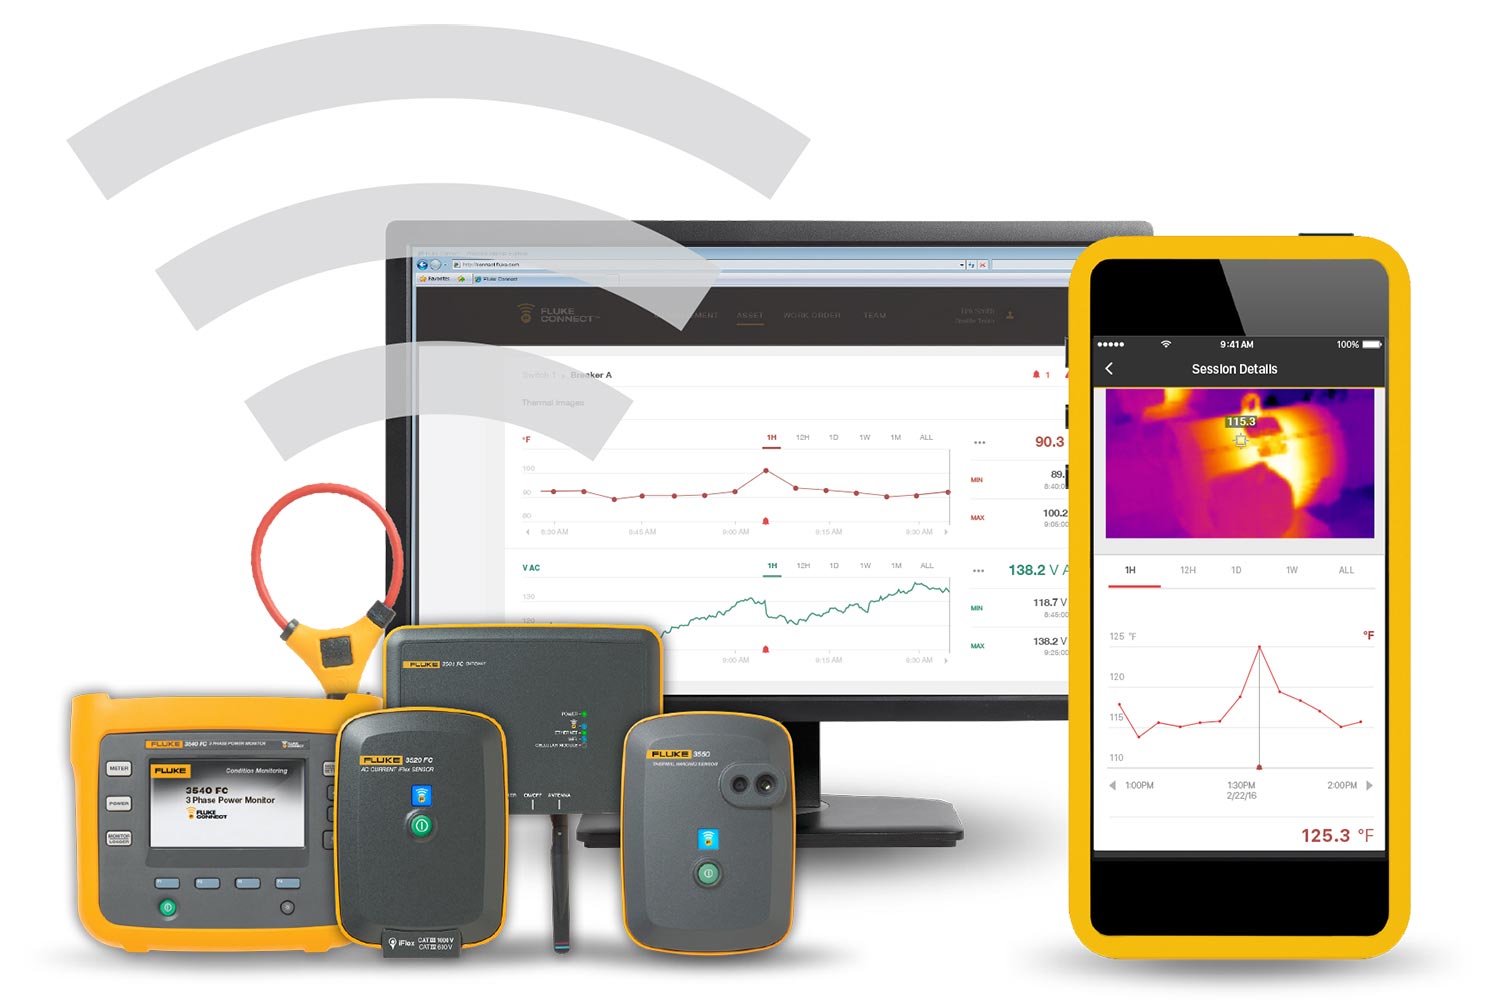 A clickable image of Fluke Connect tools, sensors and software. Leads to Fluke Connect page.